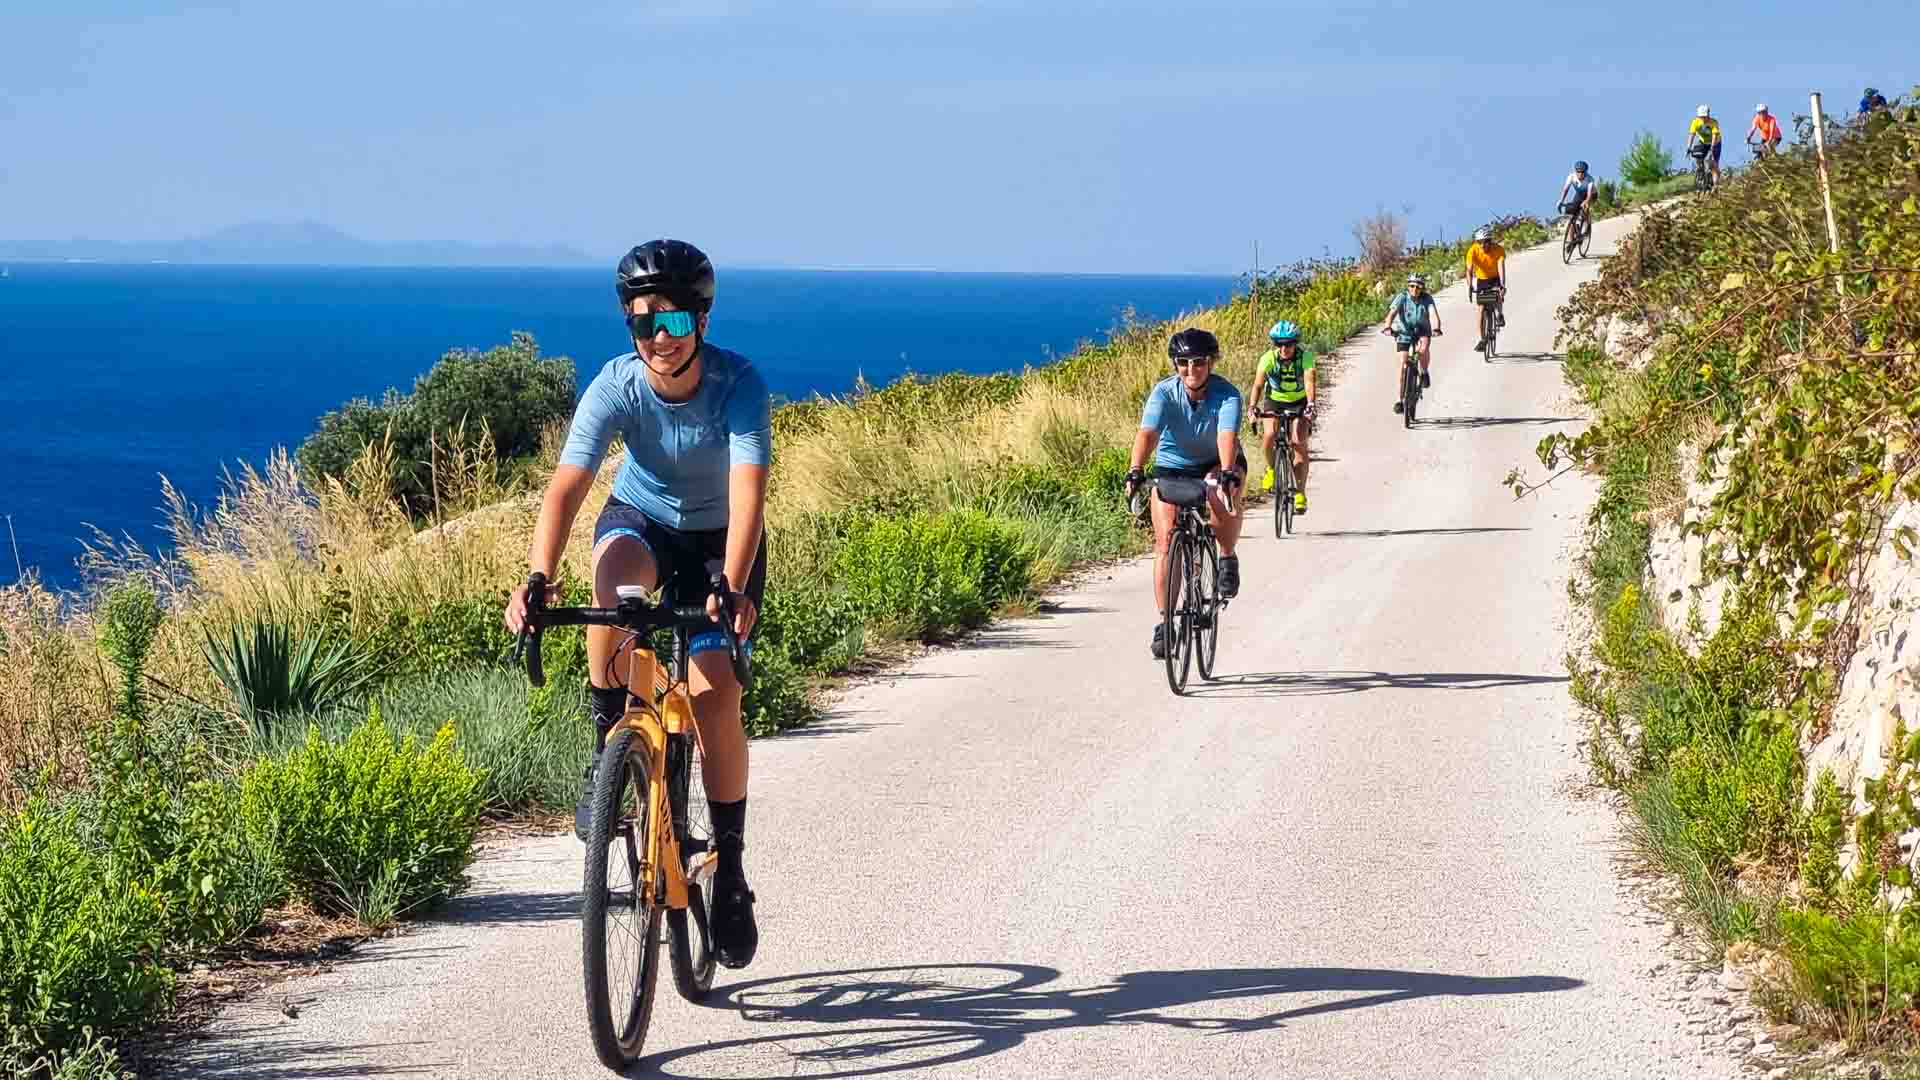 Line of cyclists cycling on gravel roads by the sea in Dalmatia Croatia